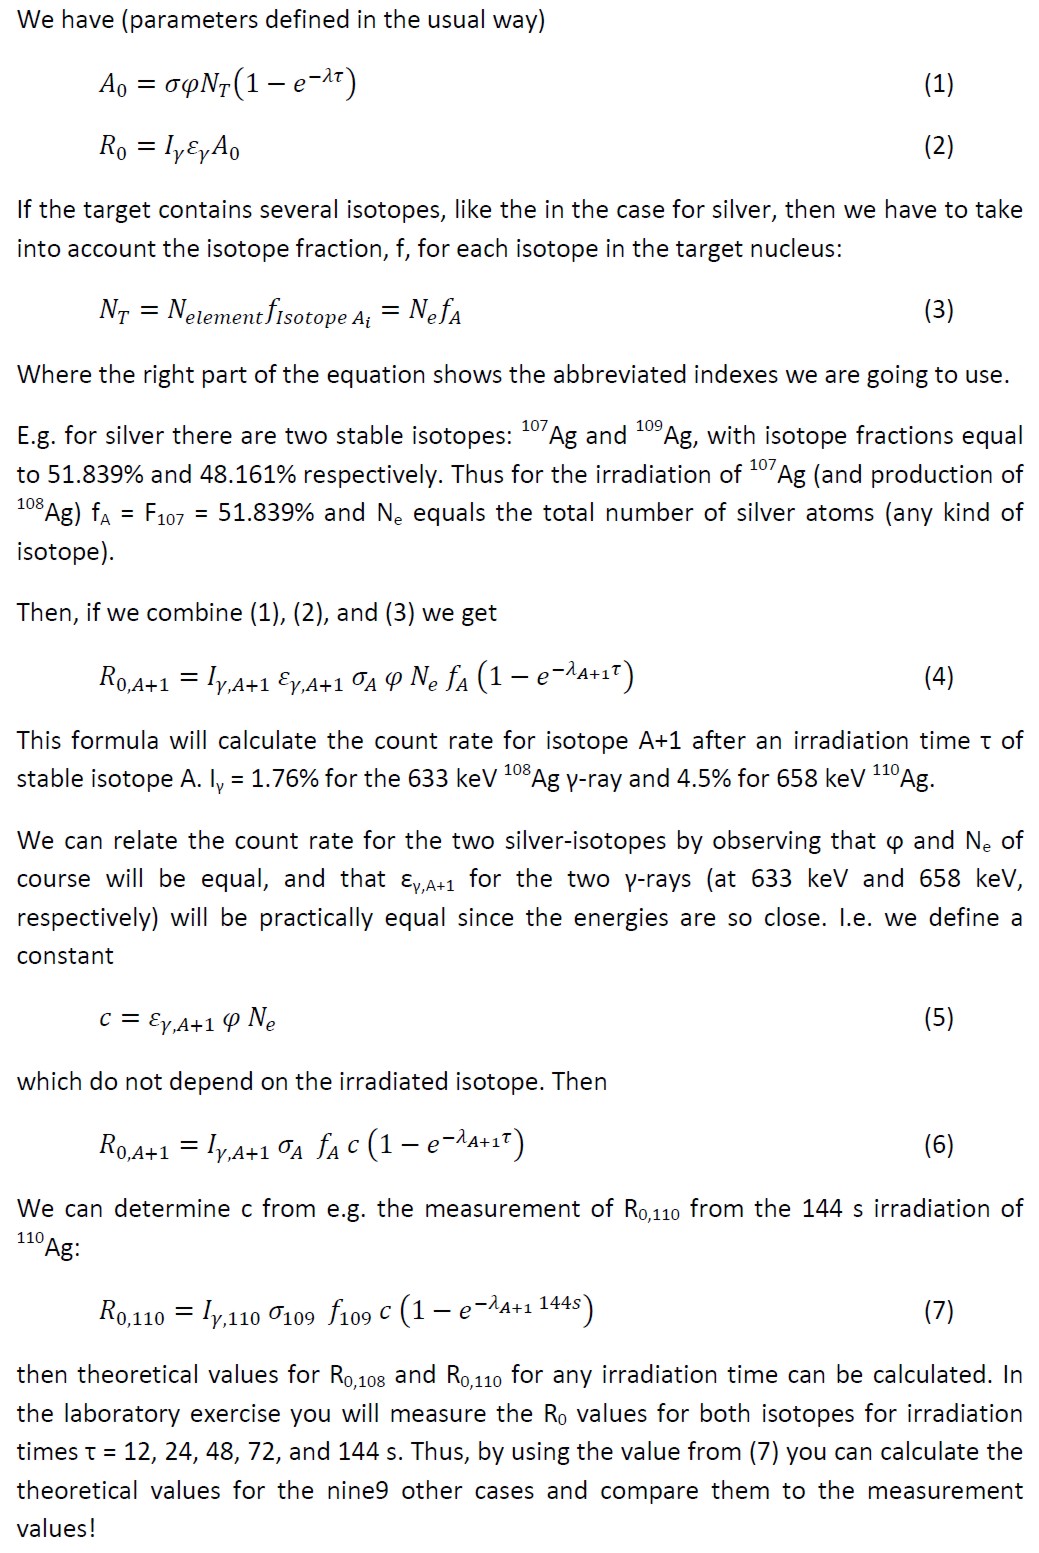 Help calculationg R0 for silver irradiation.jpg